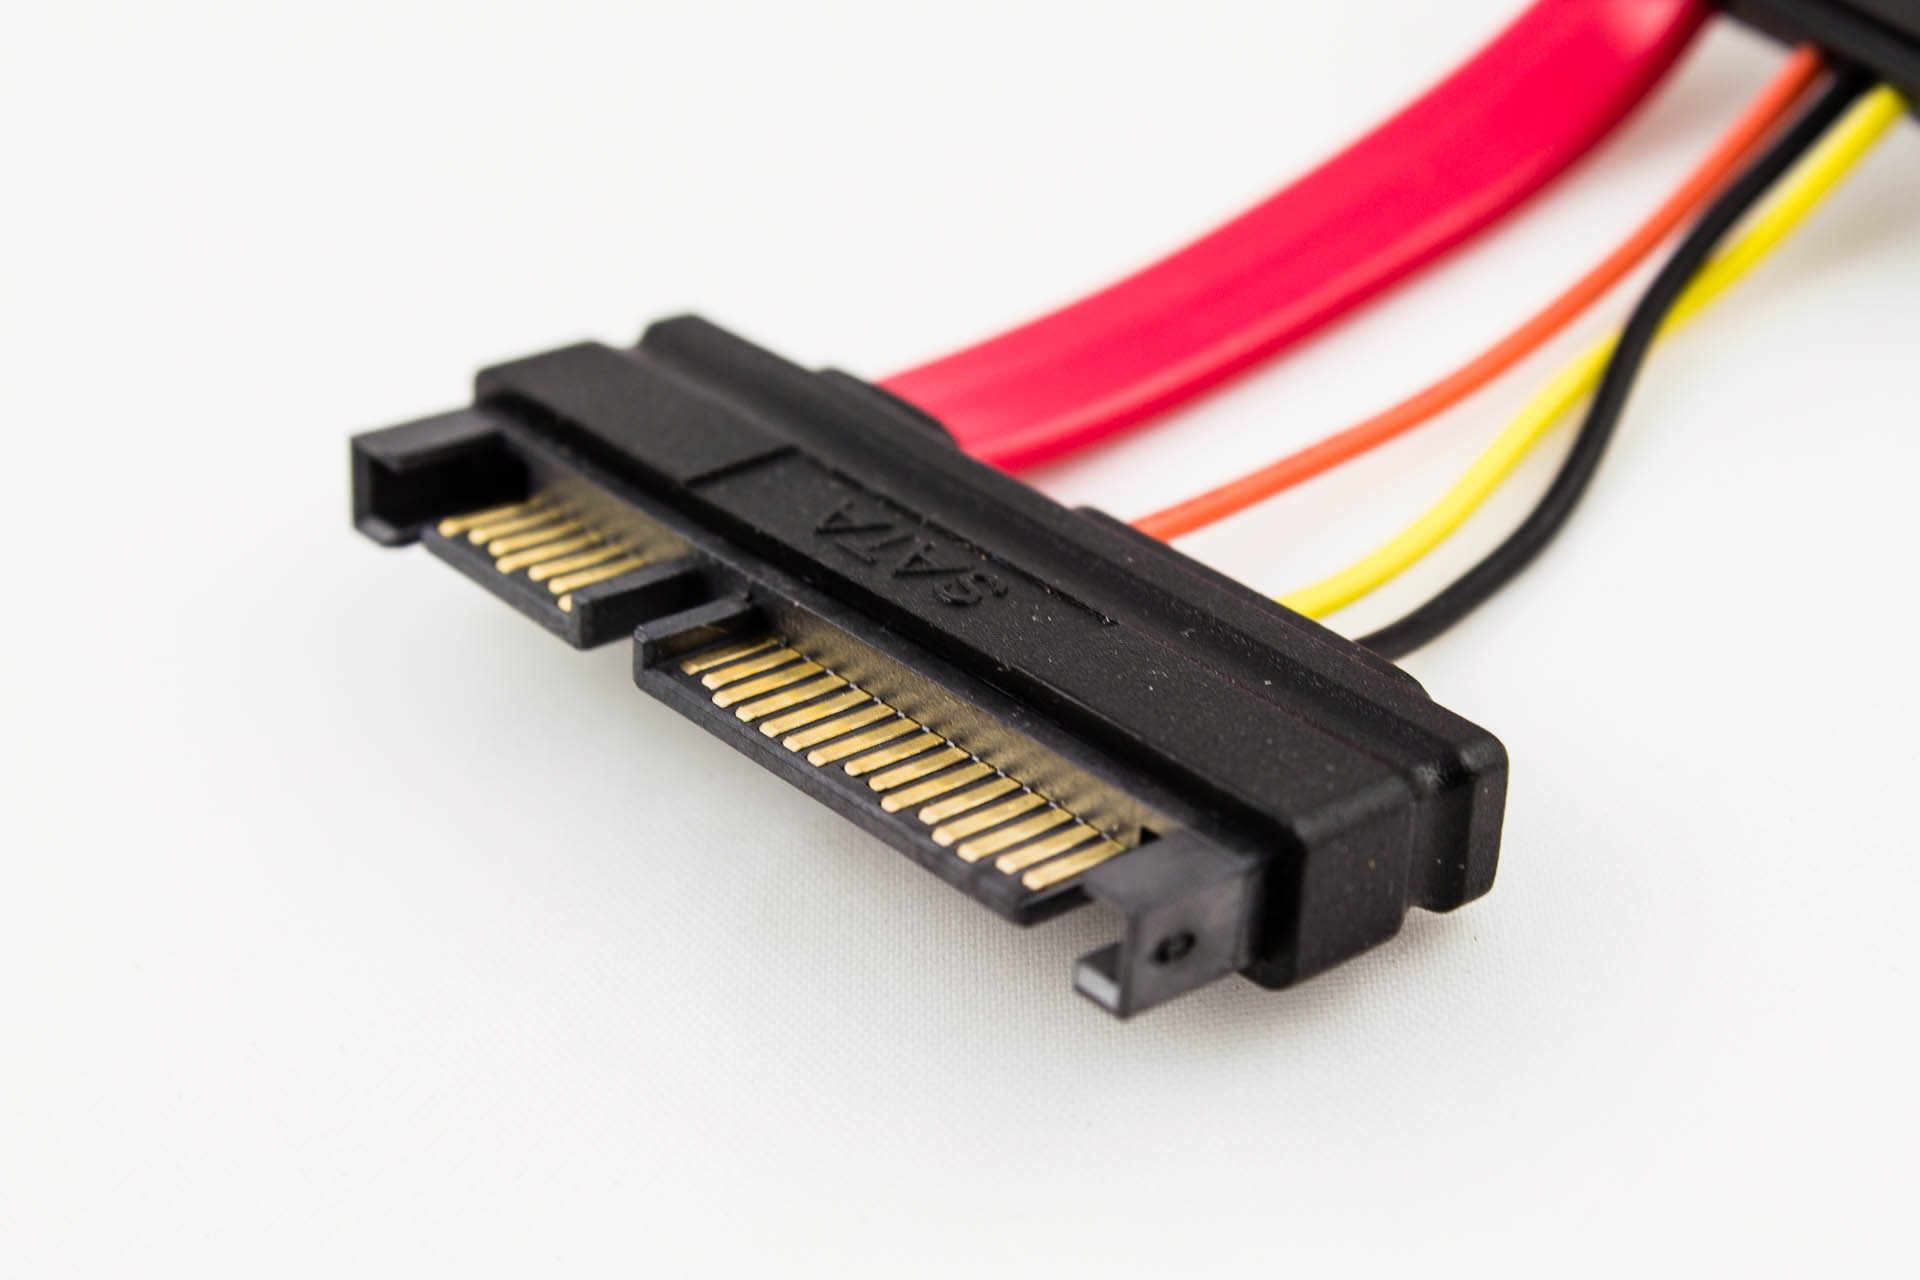 How To Use Usb 3.0 To Sata Adapter